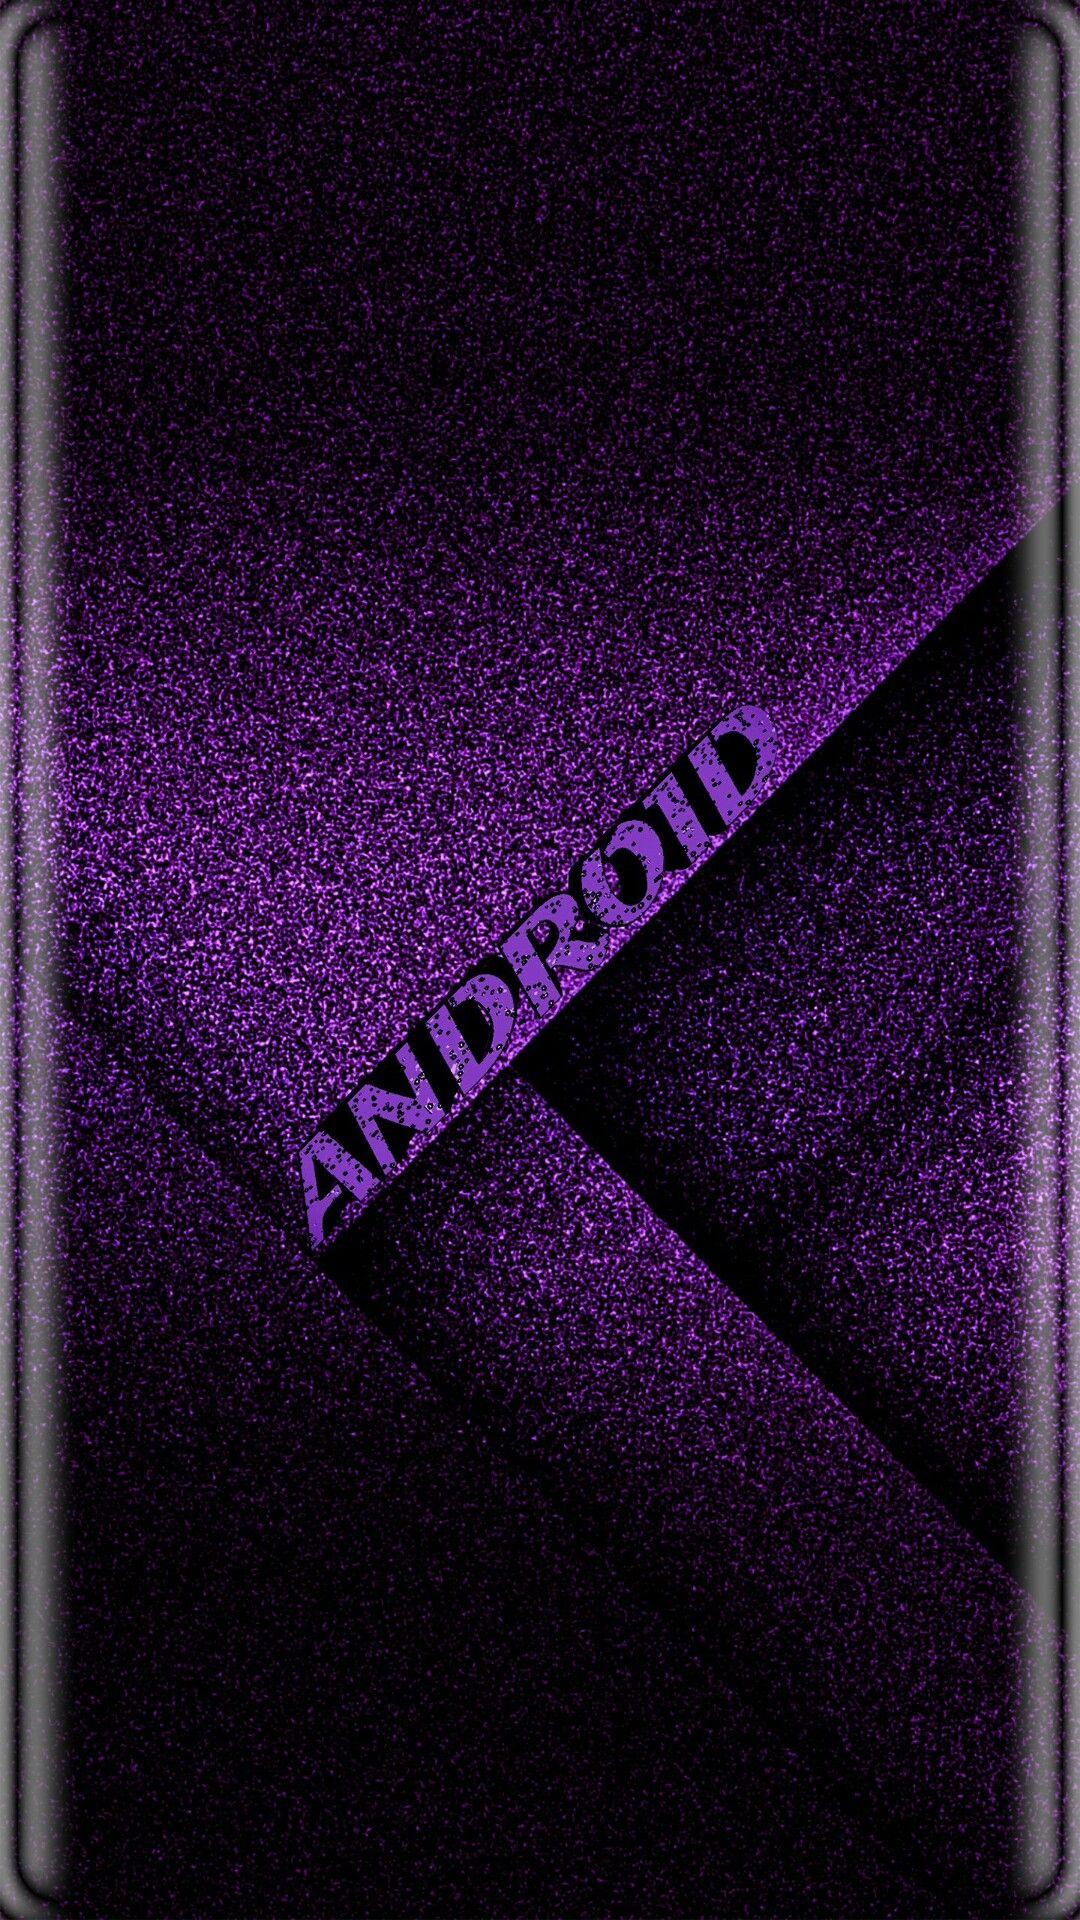 Purple Texture Android Wallpaper. Purple wallpaper, Android